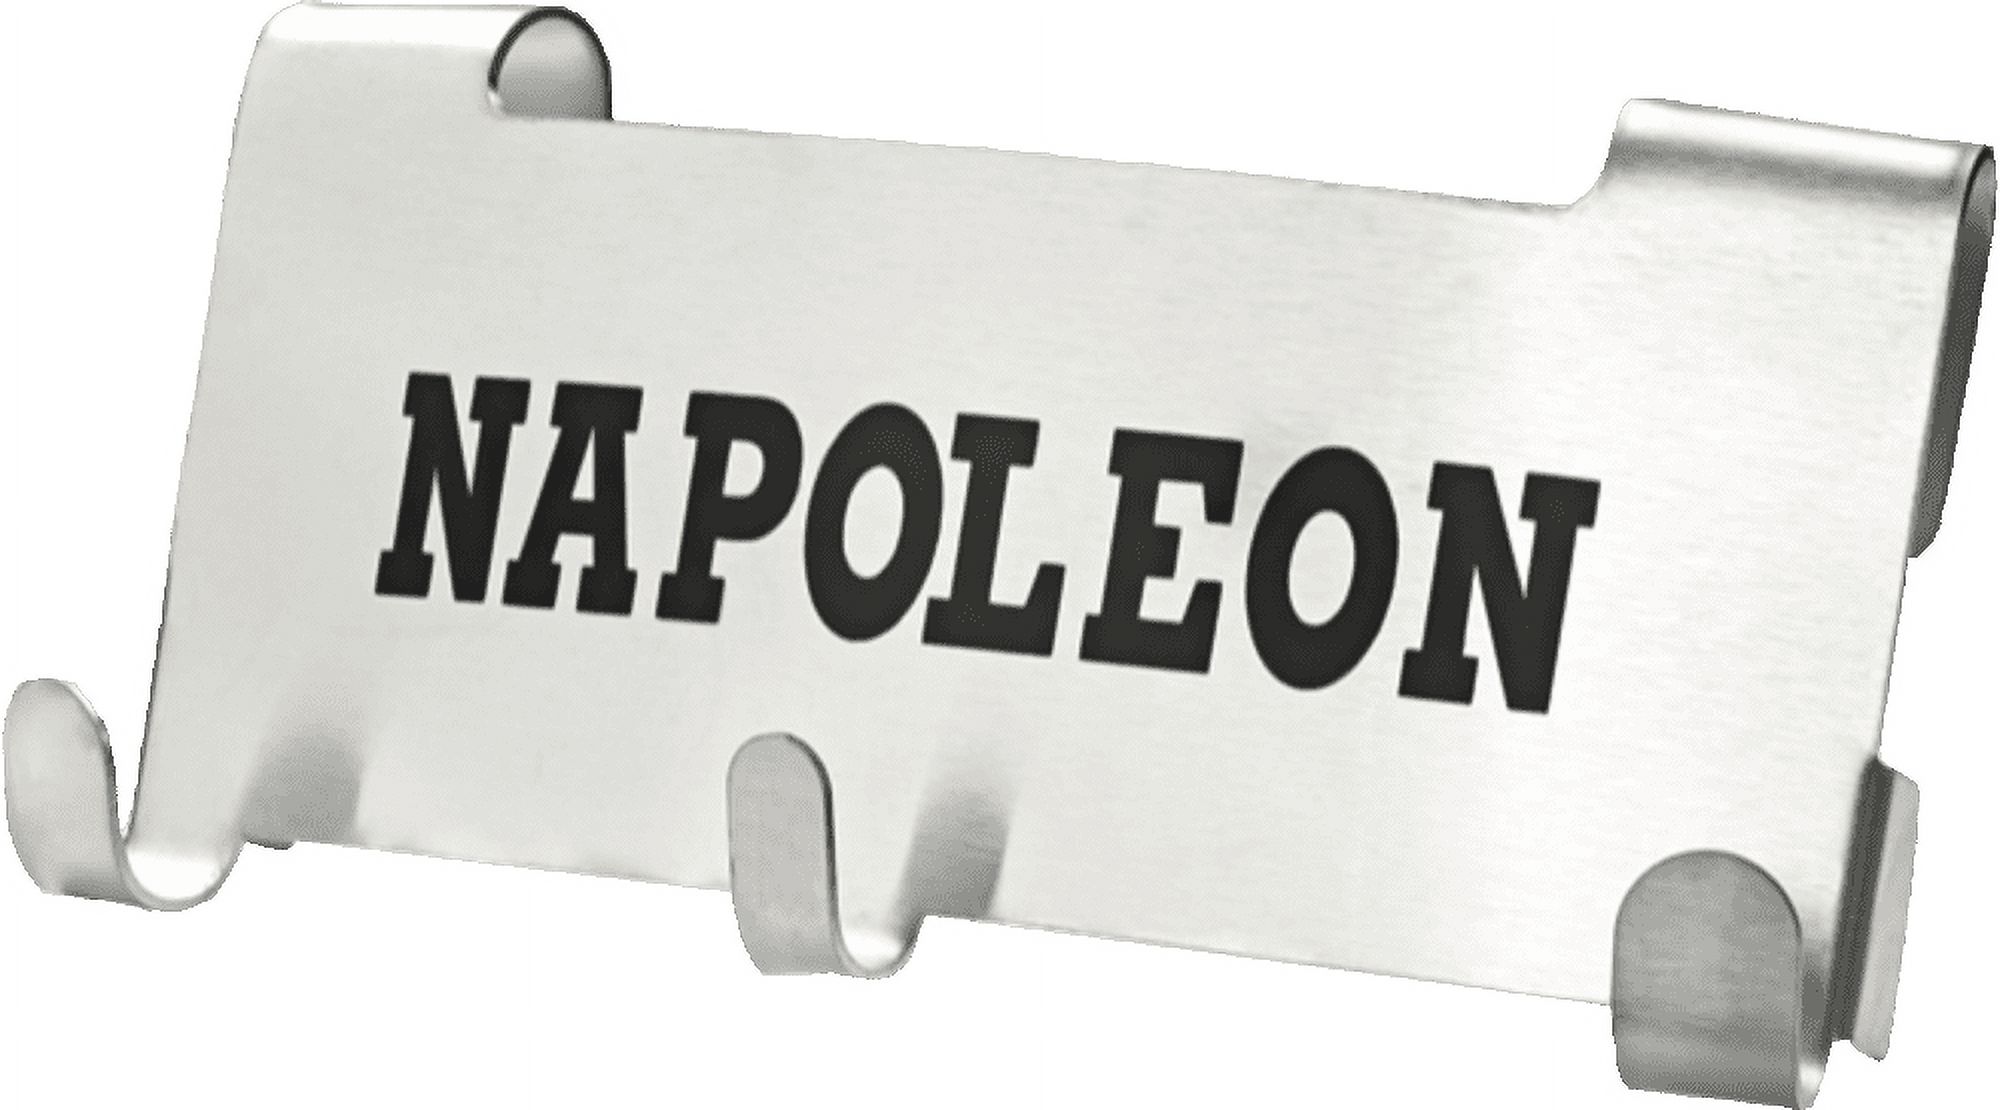 Napoleon-55100N Tool Hook Bracket for Kettle Grill - image 1 of 3